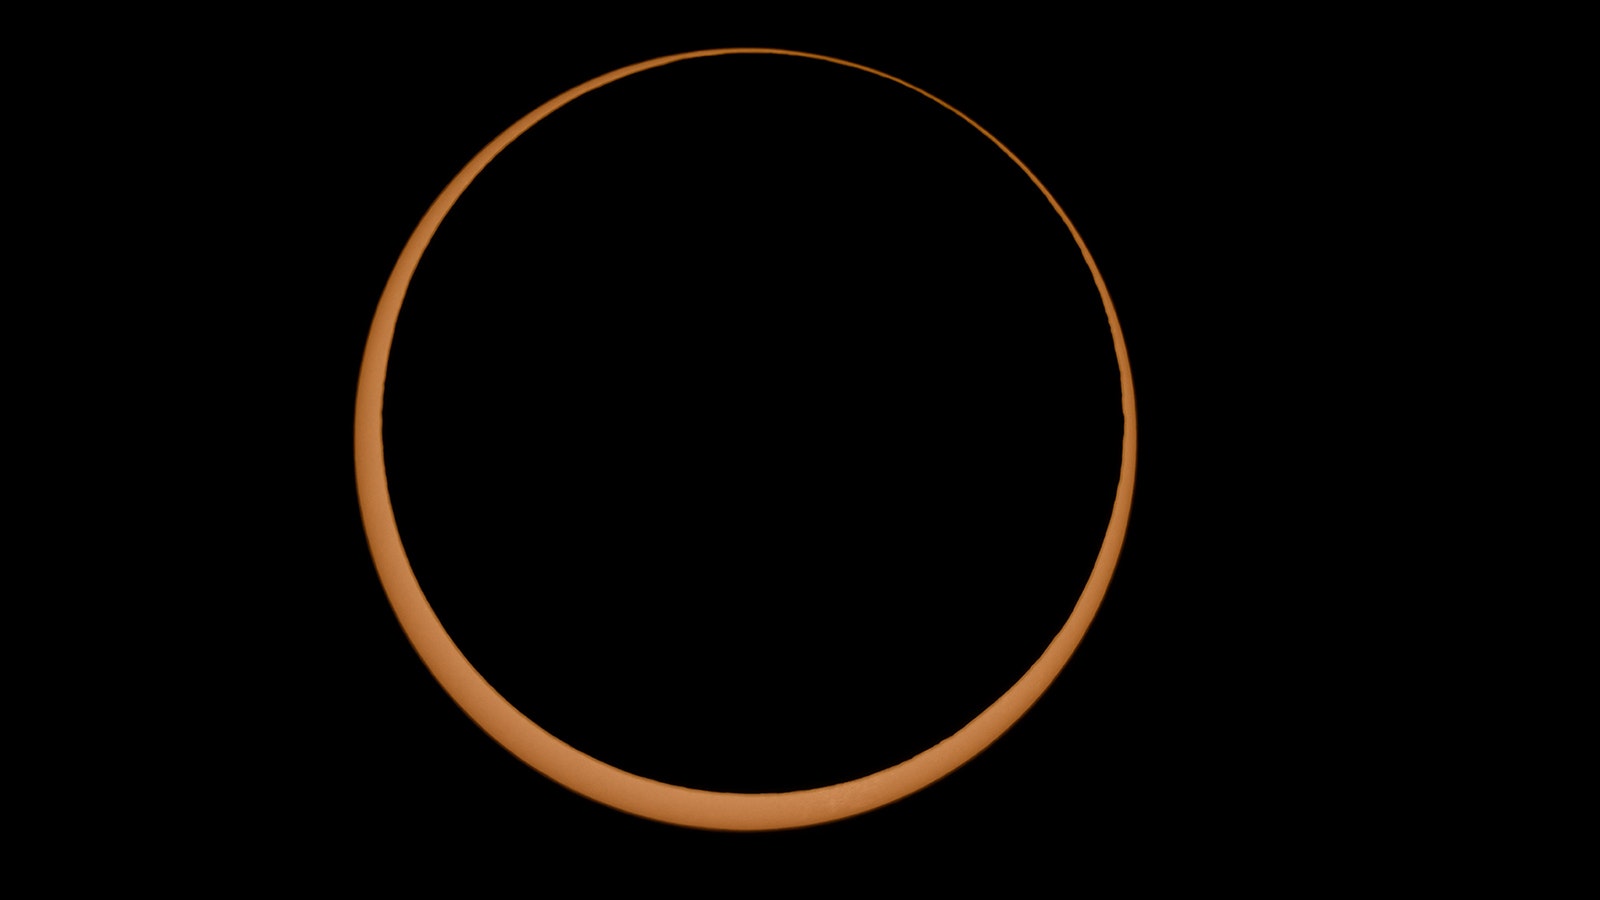 Saturday's annular eclipse is call a ring of fire because the moon moving in front of the sun seems smaller, leaving a ring of the sun showing.